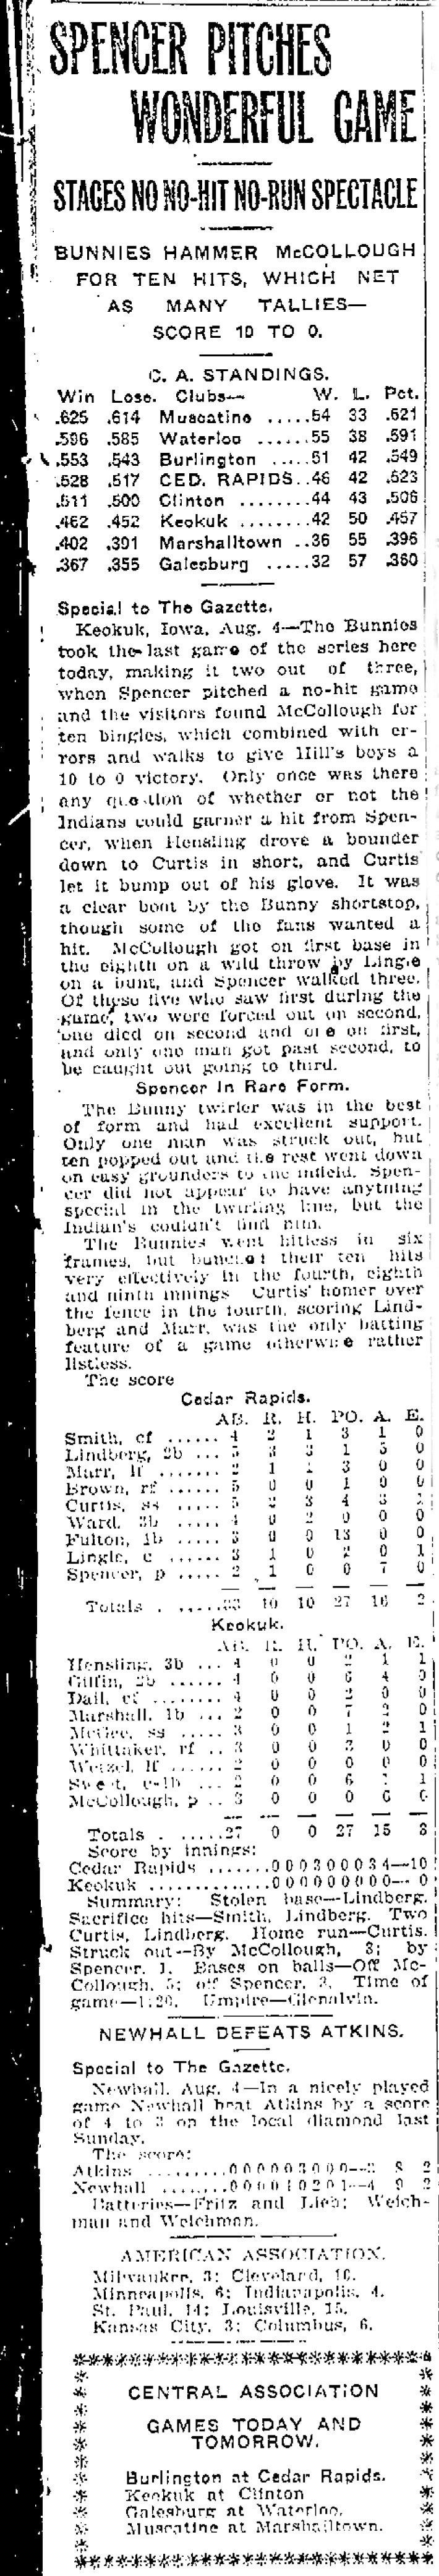 The 1914 Cedar Rapids Bunnies posted a 65-59 record under manager Beldin